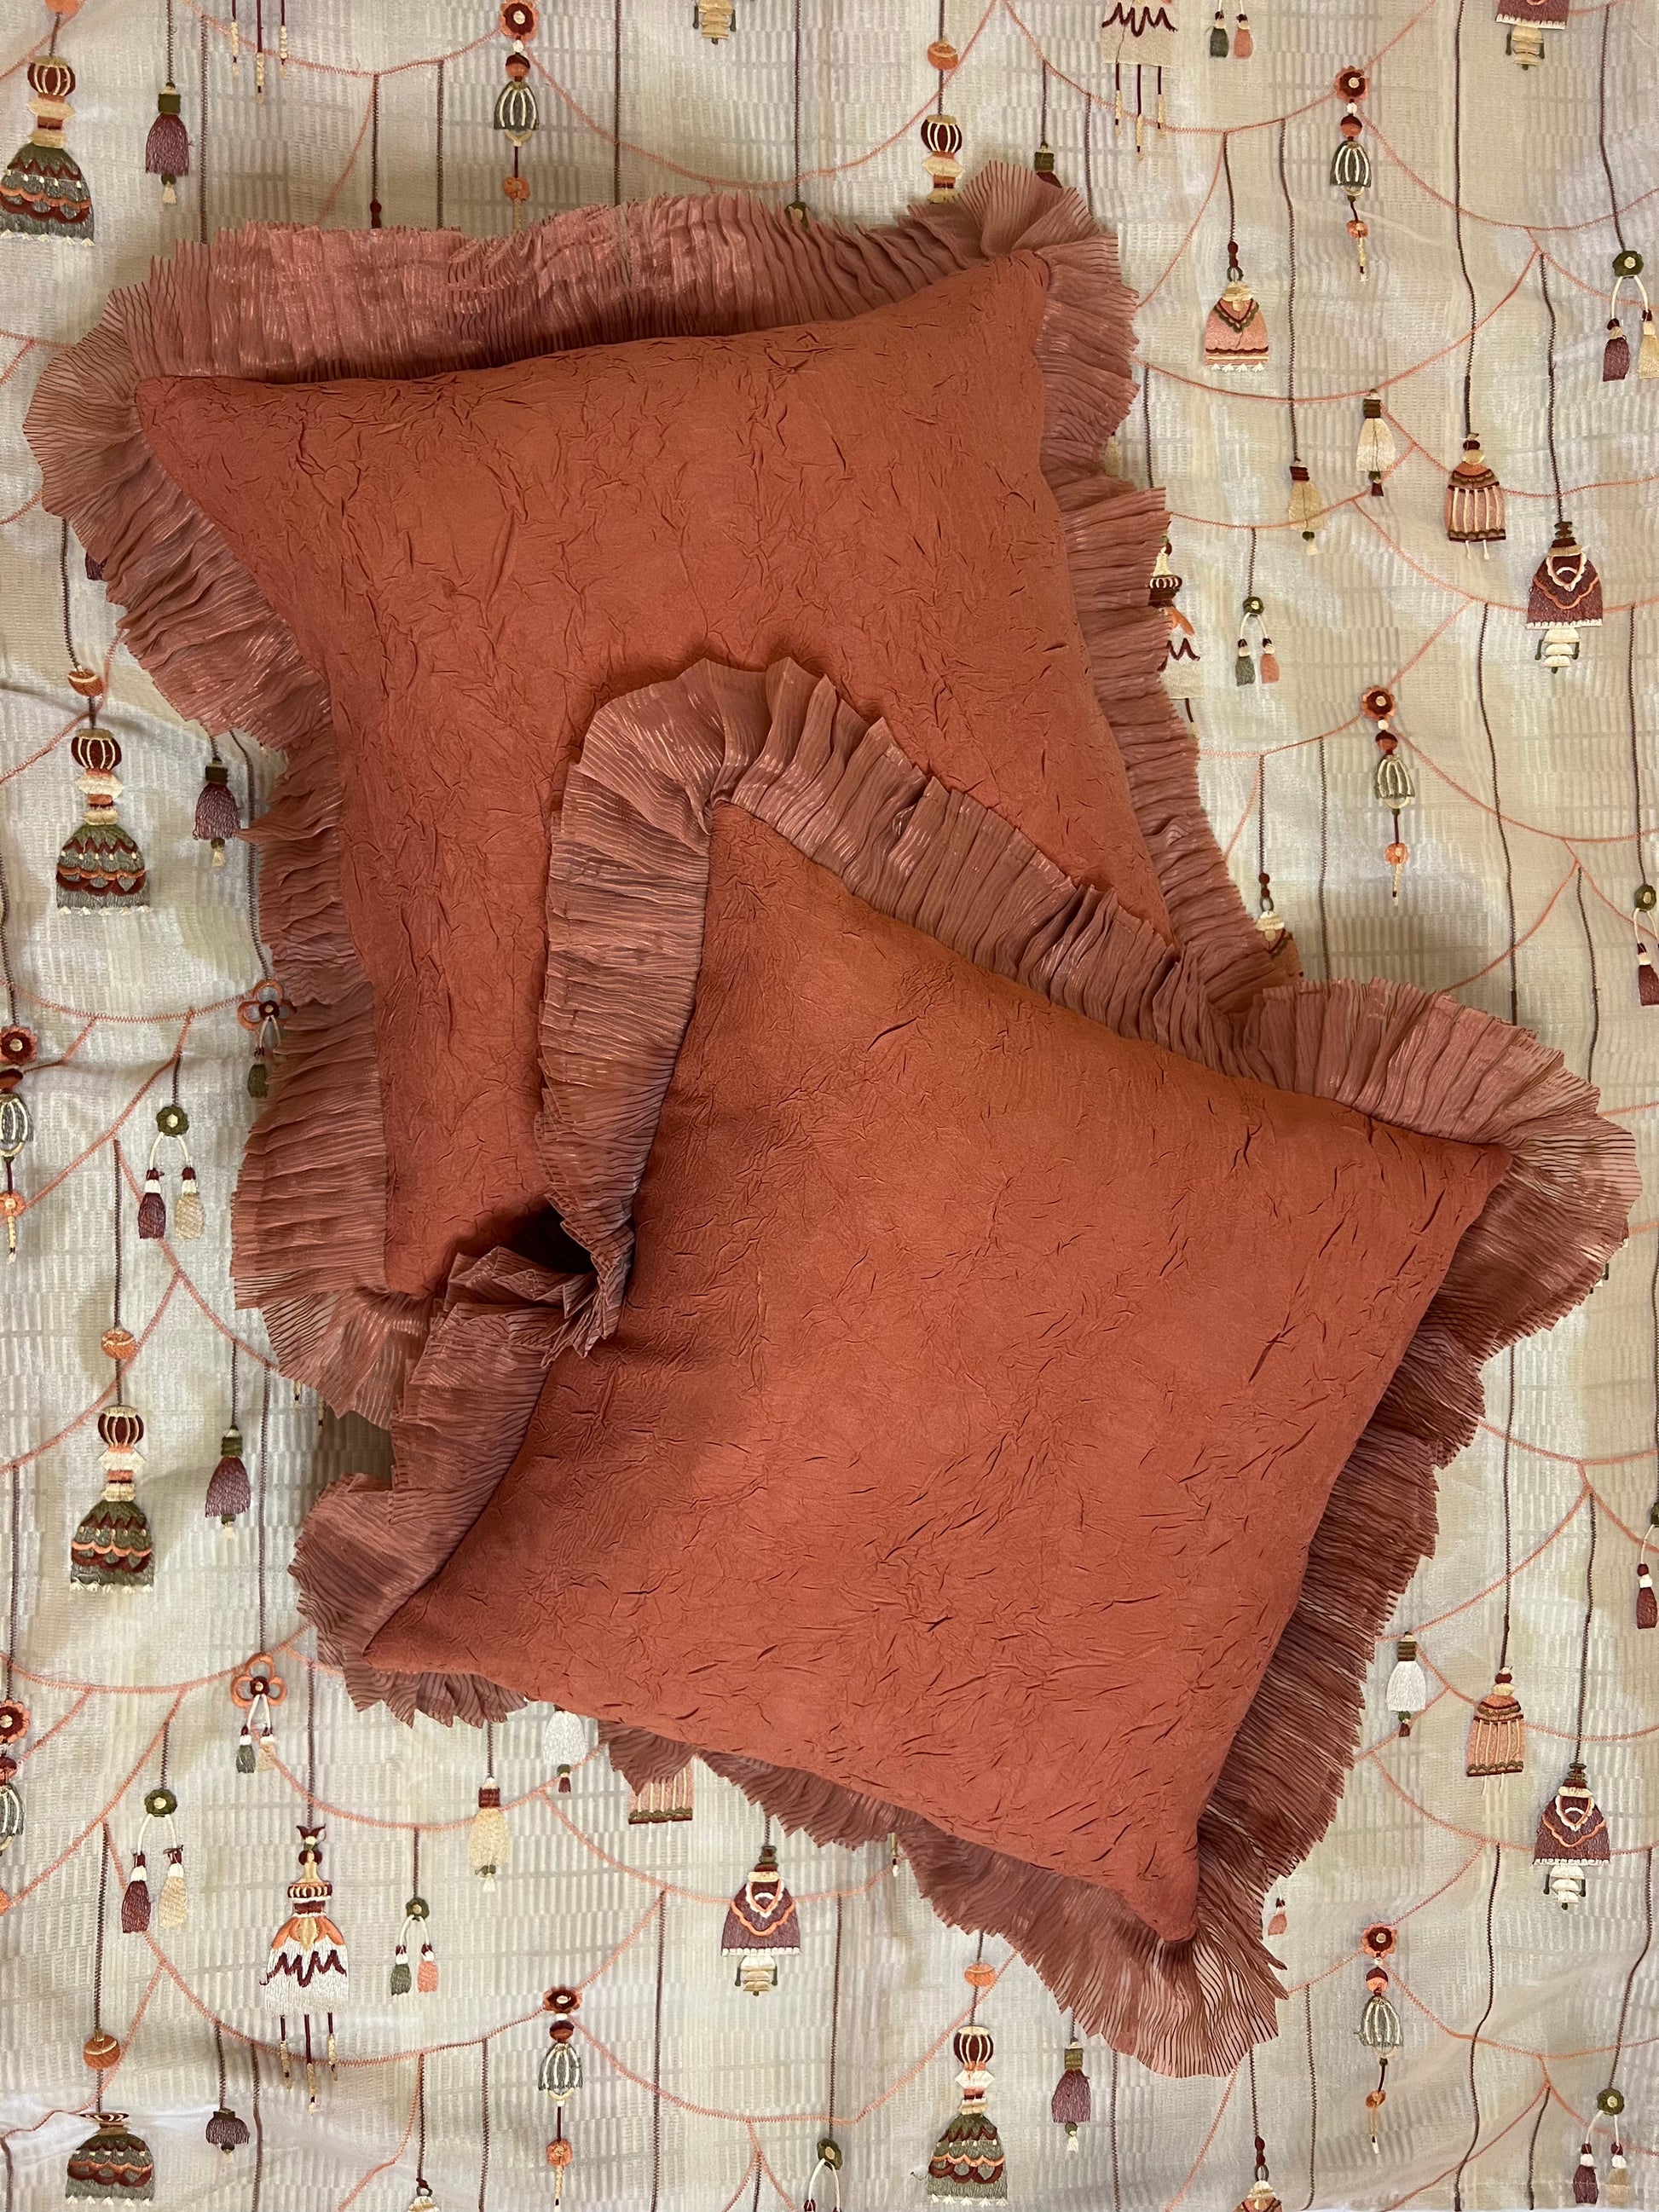 Rustic Ruffle Cushion Cover Sets at Kamakhyaa by Aetherea. This item is Cotton, Cushion, Cushion covers, Home, Orange, Plain, Ruffles, Solid, Upcycled